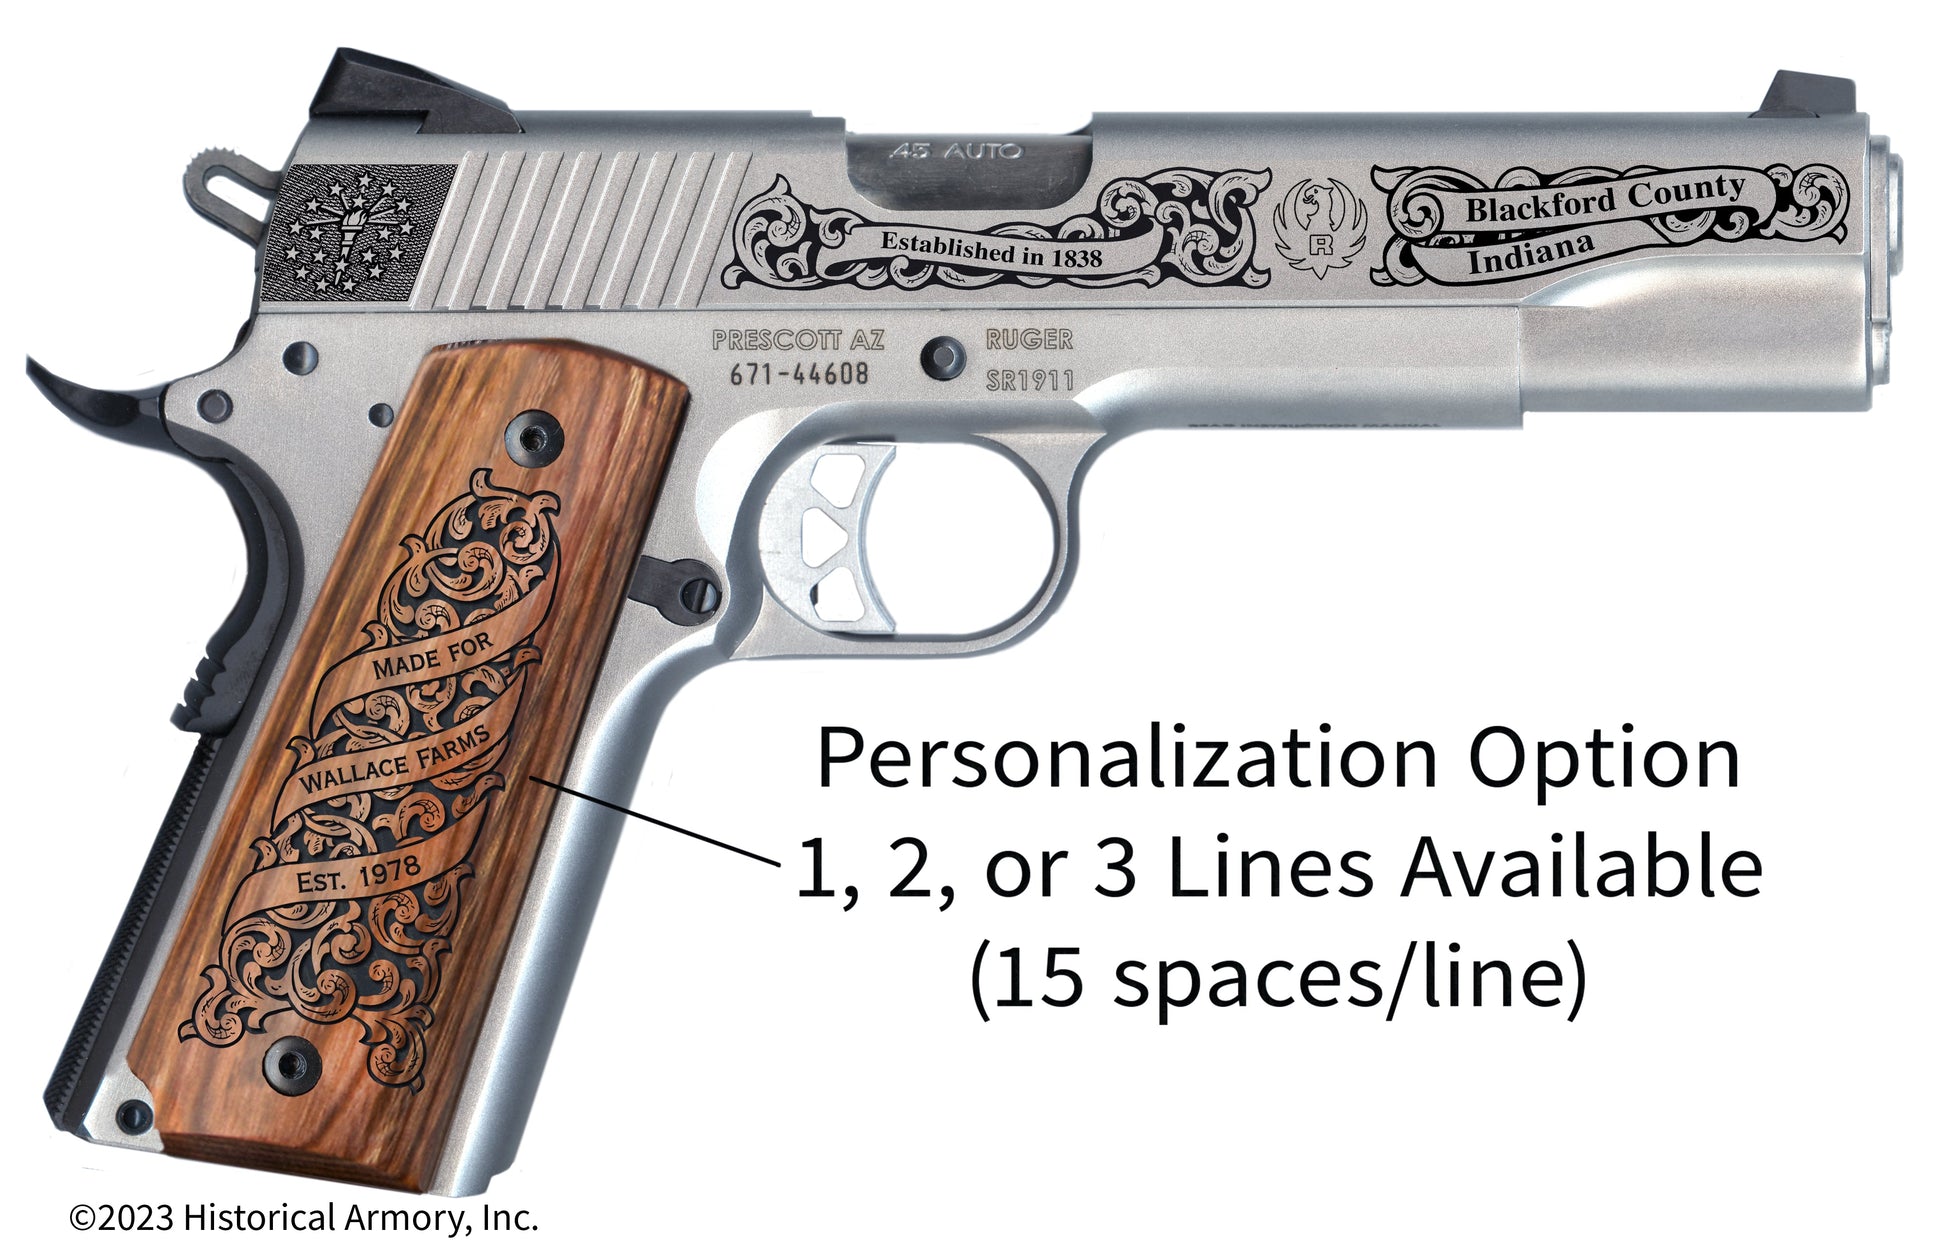 Blackford County Indiana Personalized Engraved .45 Auto Ruger 1911